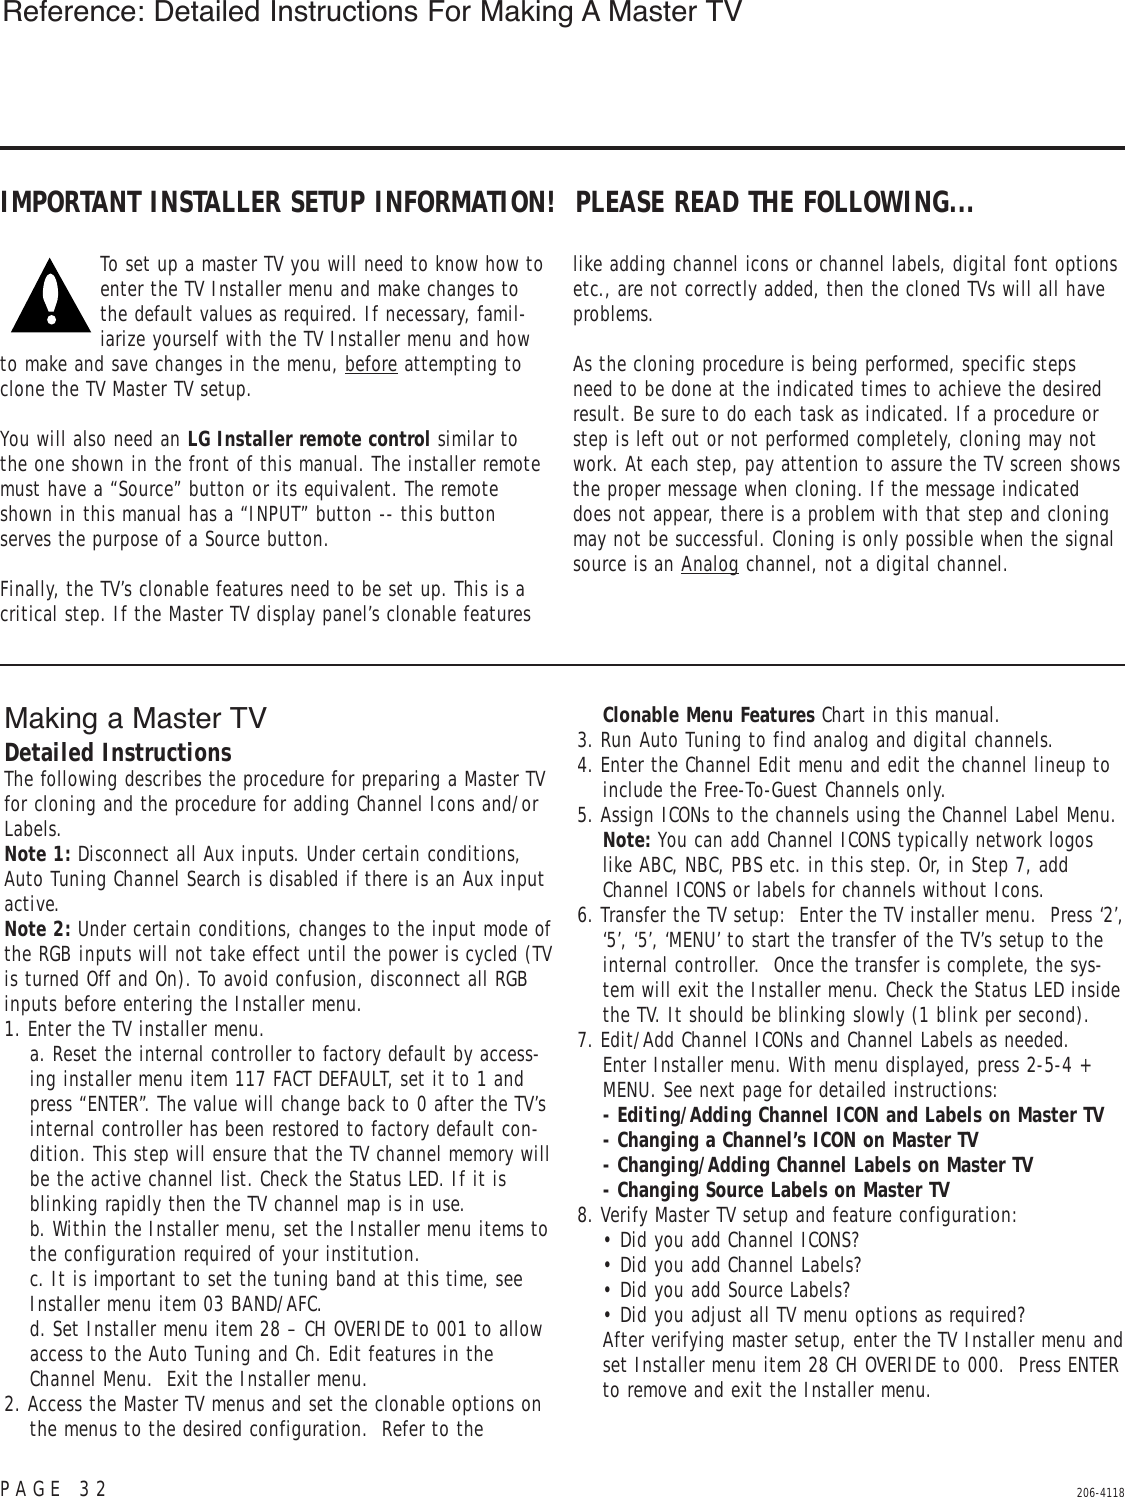 PAGE 32 206-4118IMPORTANT INSTALLER SETUP INFORMATION!  PLEASE READ THE FOLLOWING...To set up a master TV you will need to know how toenter the TV Installer menu and make changes tothe default values as required. If necessary, famil-iarize yourself with the TV Installer menu and howto make and save changes in the menu, before attempting toclone the TV Master TV setup. You will also need an LG Installer remote control similar tothe one shown in the front of this manual. The installer remotemust have a “Source” button or its equivalent. The remoteshown in this manual has a “INPUT” button -- this buttonserves the purpose of a Source button. Finally, the TV’s clonable features need to be set up. This is acritical step. If the Master TV display panel’s clonable featureslike adding channel icons or channel labels, digital font optionsetc., are not correctly added, then the cloned TVs will all haveproblems. As the cloning procedure is being performed, specific stepsneed to be done at the indicated times to achieve the desiredresult. Be sure to do each task as indicated. If a procedure orstep is left out or not performed completely, cloning may notwork. At each step, pay attention to assure the TV screen showsthe proper message when cloning. If the message indicateddoes not appear, there is a problem with that step and cloningmay not be successful. Cloning is only possible when the signalsource is an Analog channel, not a digital channel.Reference: Detailed Instructions For Making A Master TVMaking a Master TVDetailed InstructionsThe following describes the procedure for preparing a Master TVfor cloning and the procedure for adding Channel Icons and/orLabels.Note 1: Disconnect all Aux inputs. Under certain conditions,Auto Tuning Channel Search is disabled if there is an Aux inputactive.Note 2: Under certain conditions, changes to the input mode ofthe RGB inputs will not take effect until the power is cycled (TVis turned Off and On). To avoid confusion, disconnect all RGBinputs before entering the Installer menu.1. Enter the TV installer menu.  a. Reset the internal controller to factory default by access-ing installer menu item 117 FACT DEFAULT, set it to 1 andpress “ENTER”. The value will change back to 0 after the TV’sinternal controller has been restored to factory default con-dition. This step will ensure that the TV channel memory willbe the active channel list. Check the Status LED. If it isblinking rapidly then the TV channel map is in use. b. Within the Installer menu, set the Installer menu items tothe configuration required of your institution.  c. It is important to set the tuning band at this time, seeInstaller menu item 03 BAND/AFC.  d. Set Installer menu item 28 – CH OVERIDE to 001 to allowaccess to the Auto Tuning and Ch. Edit features in theChannel Menu.  Exit the Installer menu.2. Access the Master TV menus and set the clonable options onthe menus to the desired configuration.  Refer to theClonable Menu Features Chart in this manual.3. Run Auto Tuning to find analog and digital channels.4. Enter the Channel Edit menu and edit the channel lineup toinclude the Free-To-Guest Channels only. 5. Assign ICONs to the channels using the Channel Label Menu.Note: You can add Channel ICONS typically network logoslike ABC, NBC, PBS etc. in this step. Or, in Step 7, addChannel ICONS or labels for channels without Icons.6. Transfer the TV setup:  Enter the TV installer menu.  Press ‘2’,‘5’, ‘5’, ‘MENU’ to start the transfer of the TV’s setup to theinternal controller.  Once the transfer is complete, the sys-tem will exit the Installer menu. Check the Status LED insidethe TV. It should be blinking slowly (1 blink per second).7. Edit/Add Channel ICONs and Channel Labels as needed.  Enter Installer menu. With menu displayed, press 2-5-4 +MENU. See next page for detailed instructions:- Editing/Adding Channel ICON and Labels on Master TV- Changing a Channel’s ICON on Master TV - Changing/Adding Channel Labels on Master TV- Changing Source Labels on Master TV8. Verify Master TV setup and feature configuration:• Did you add Channel ICONS?• Did you add Channel Labels?• Did you add Source Labels?• Did you adjust all TV menu options as required? After verifying master setup, enter the TV Installer menu andset Installer menu item 28 CH OVERIDE to 000. Press ENTERto remove and exit the Installer menu.